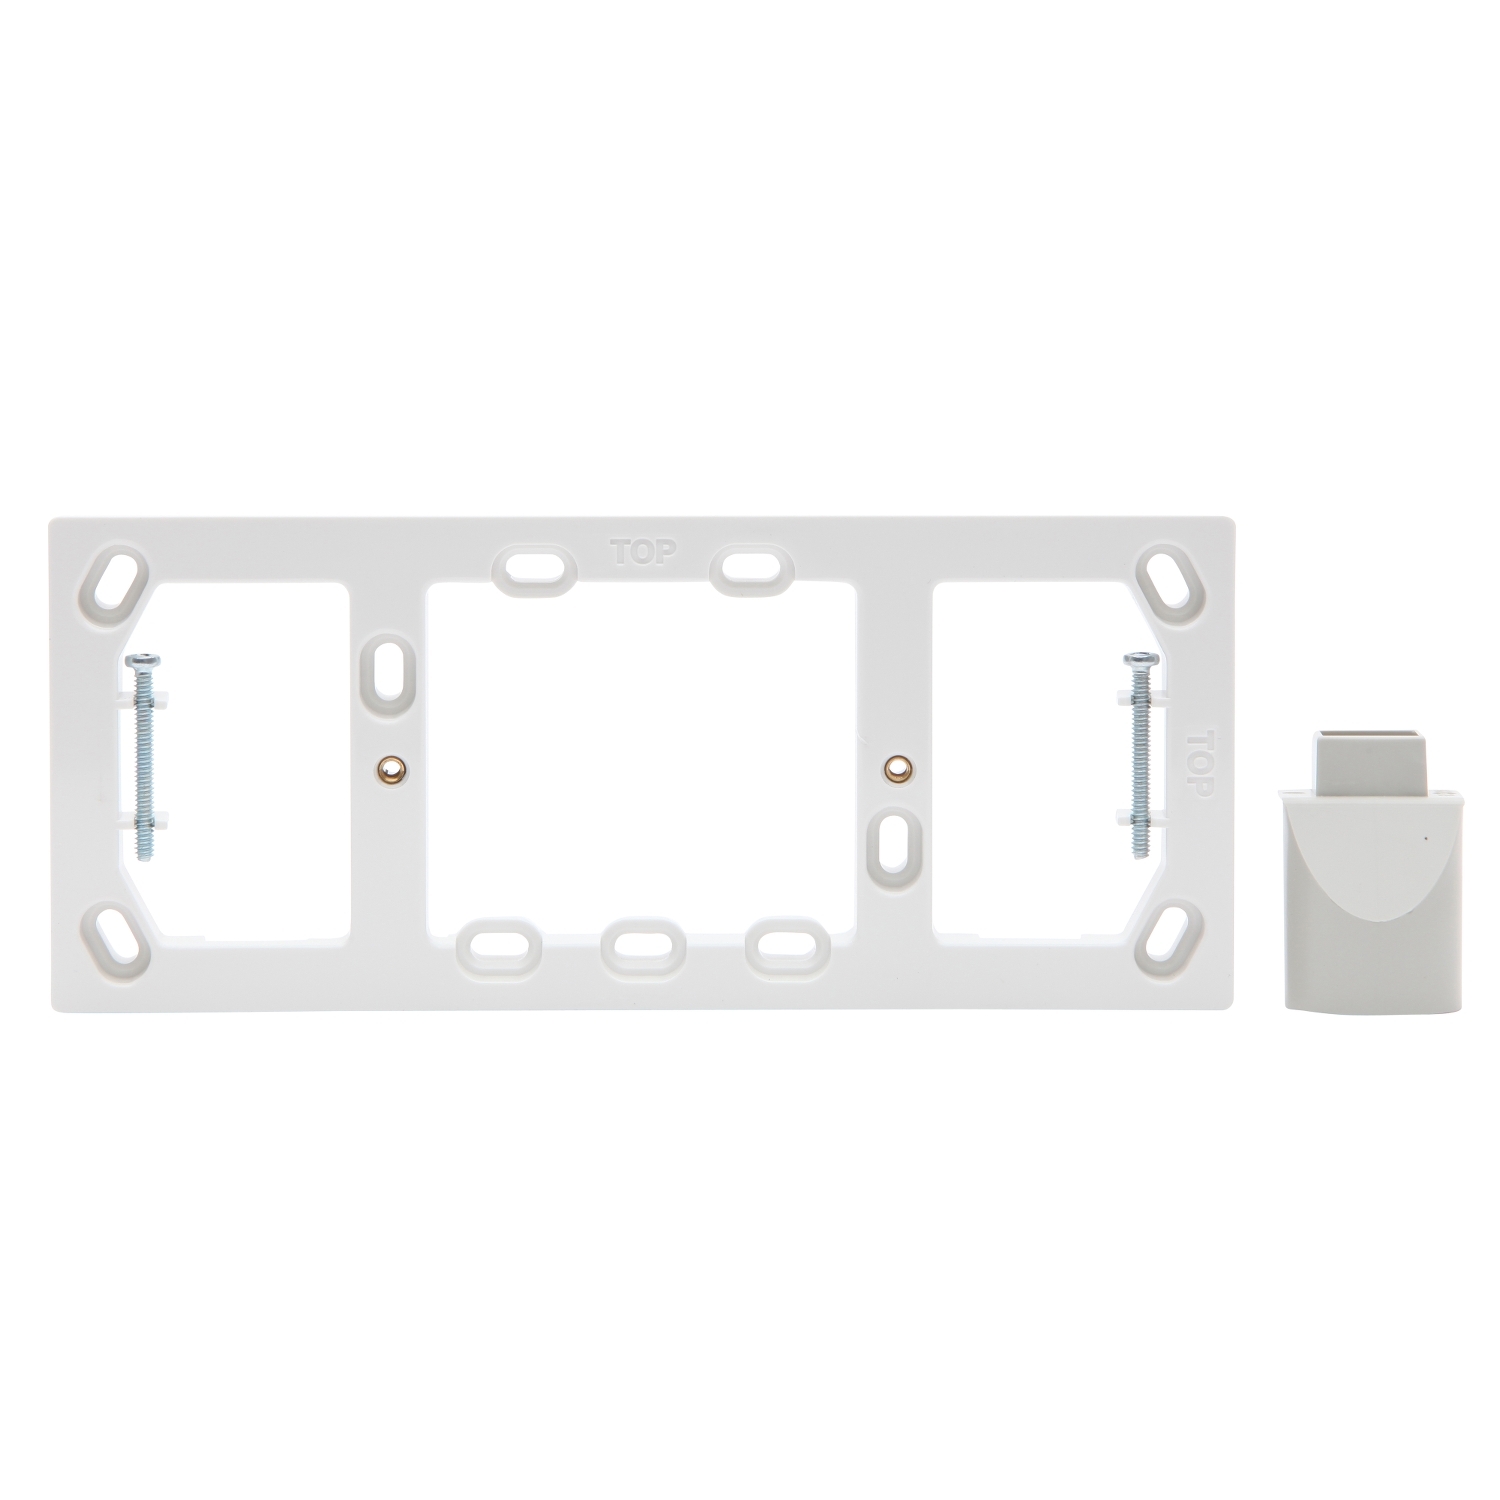 PDL Quad Socket Mounting Block with Conduit Entry - White